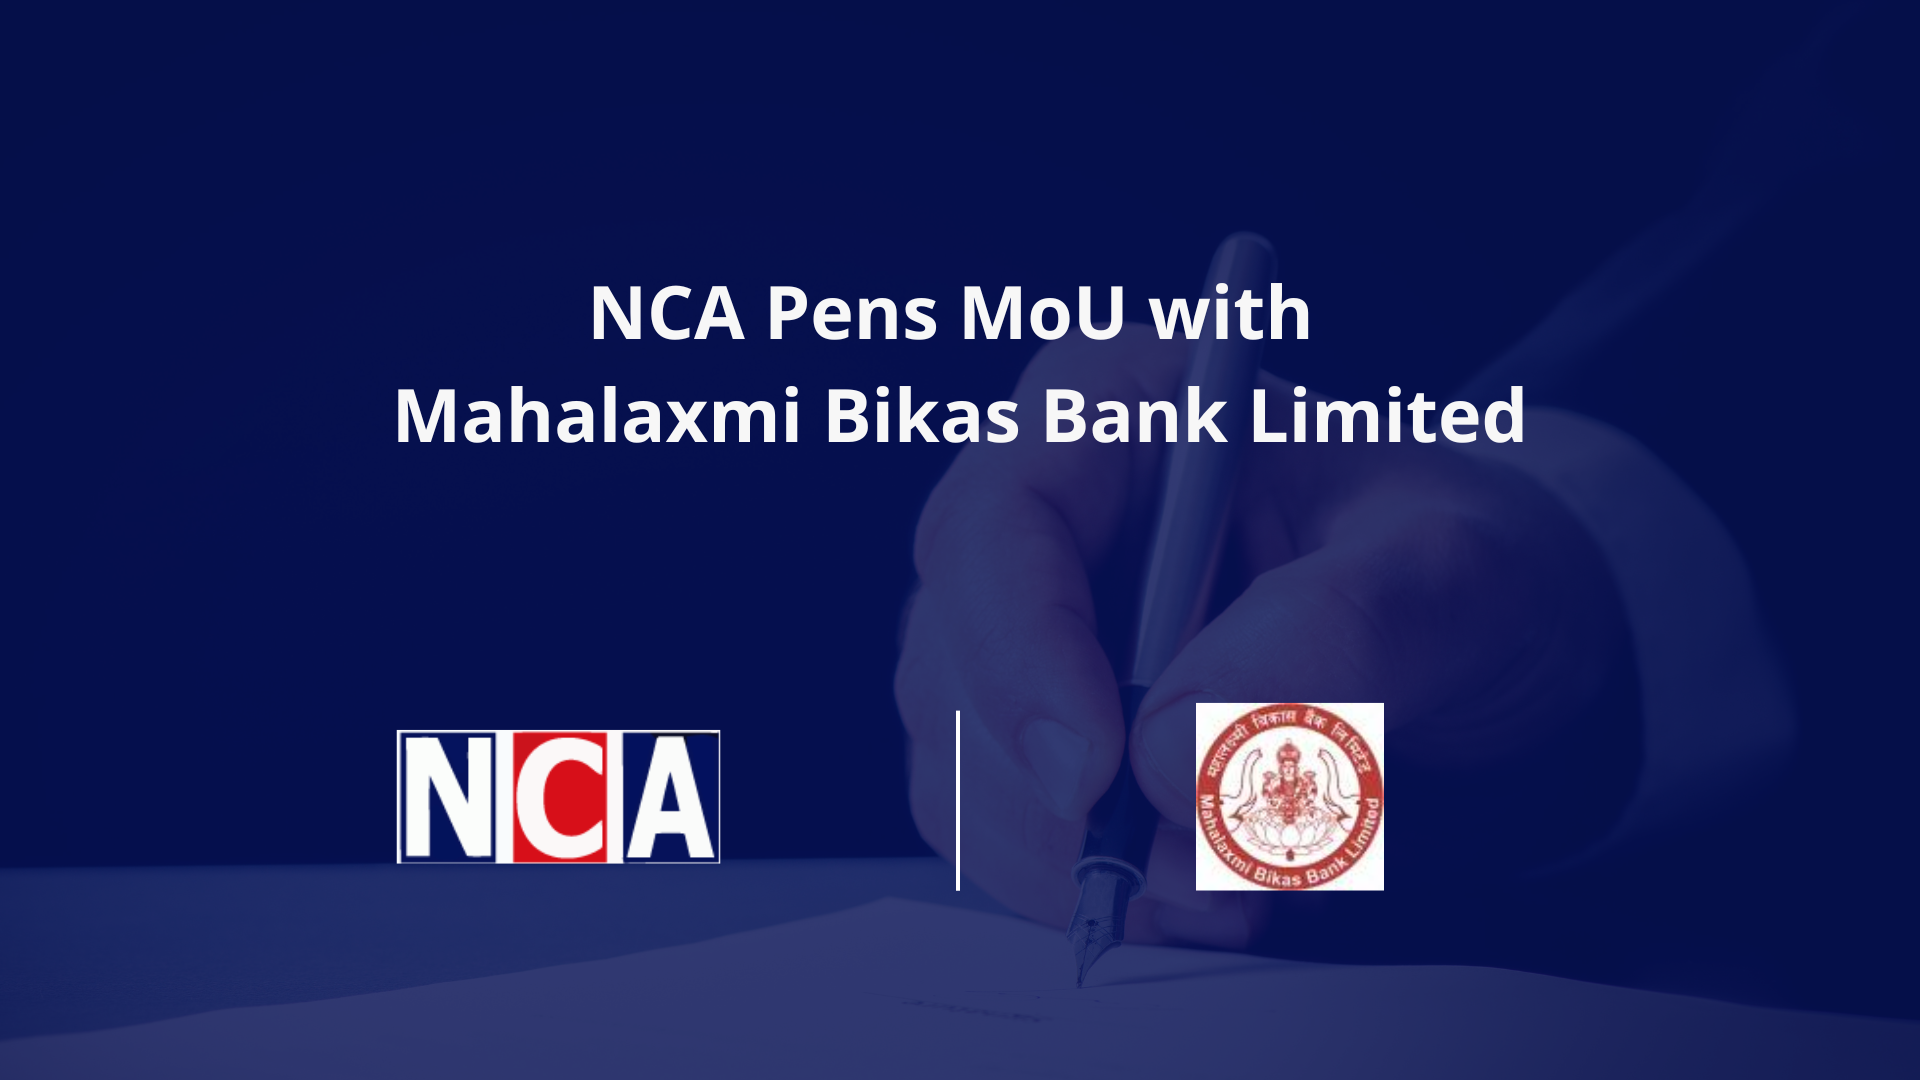 NCA Pens MoU with Mahalaxmi Bikas Bank Limited; Creates Exciting Opportunities